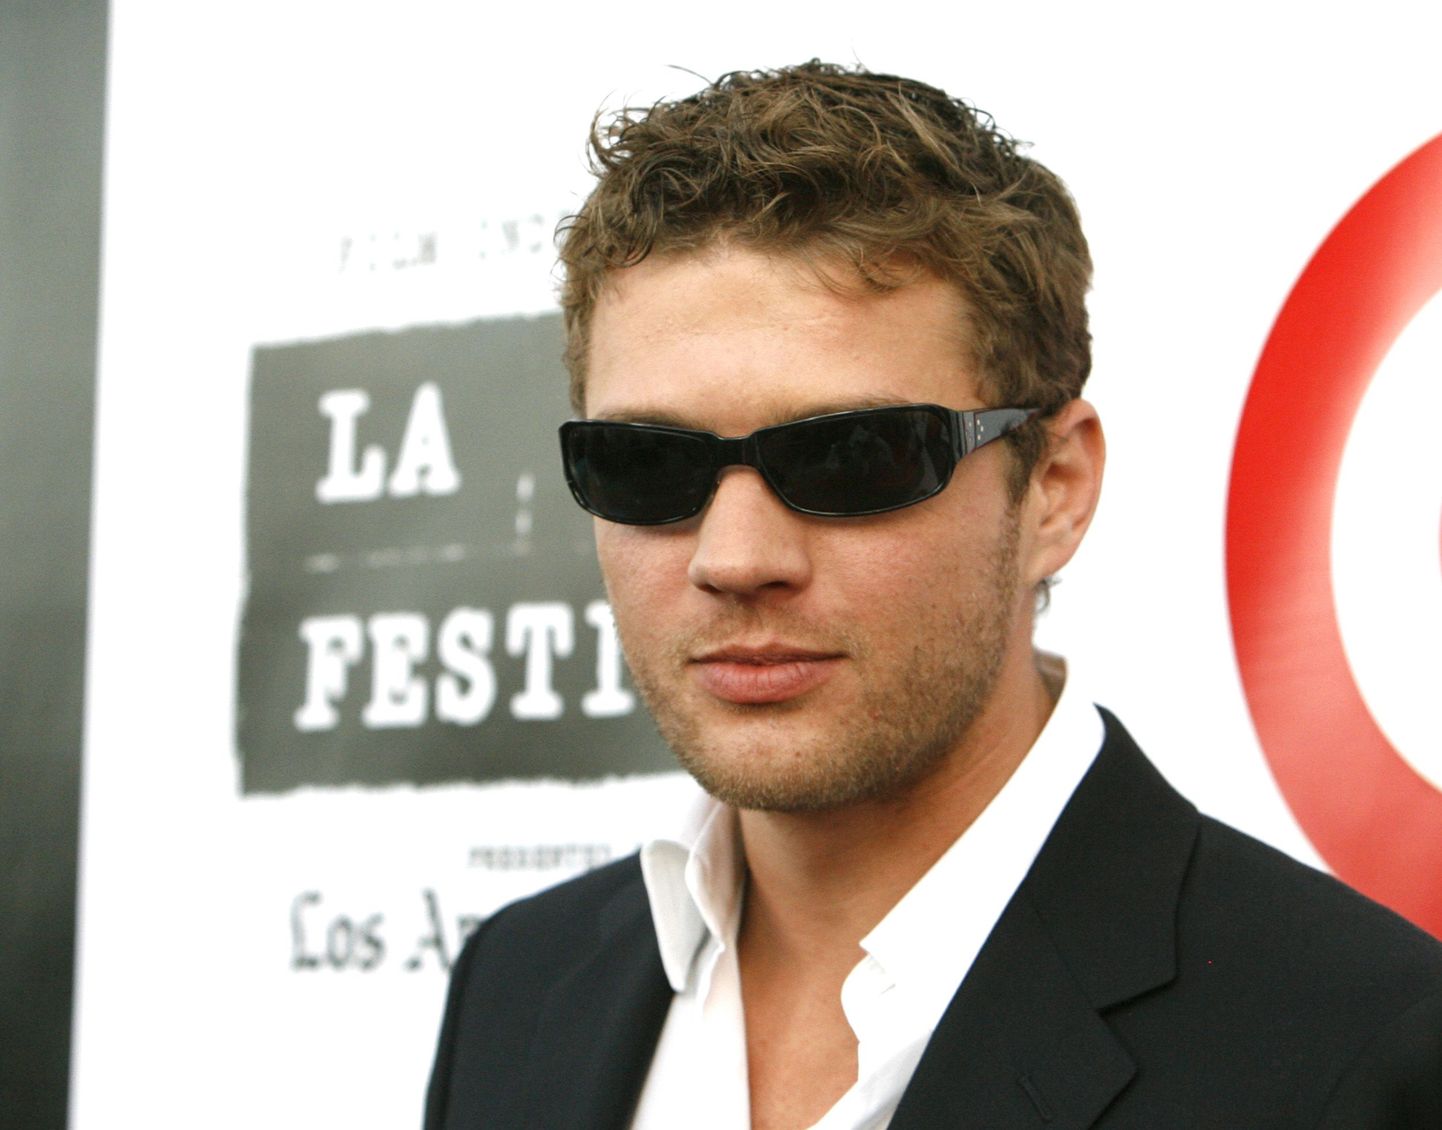 Actor Ryan Phillippe attends the Los Angeles Film Festival's third annual Spirit of Independence Award in Los Angeles June 28, 2007. REUTERS/Mario Anzuoni (UNITED STATES)